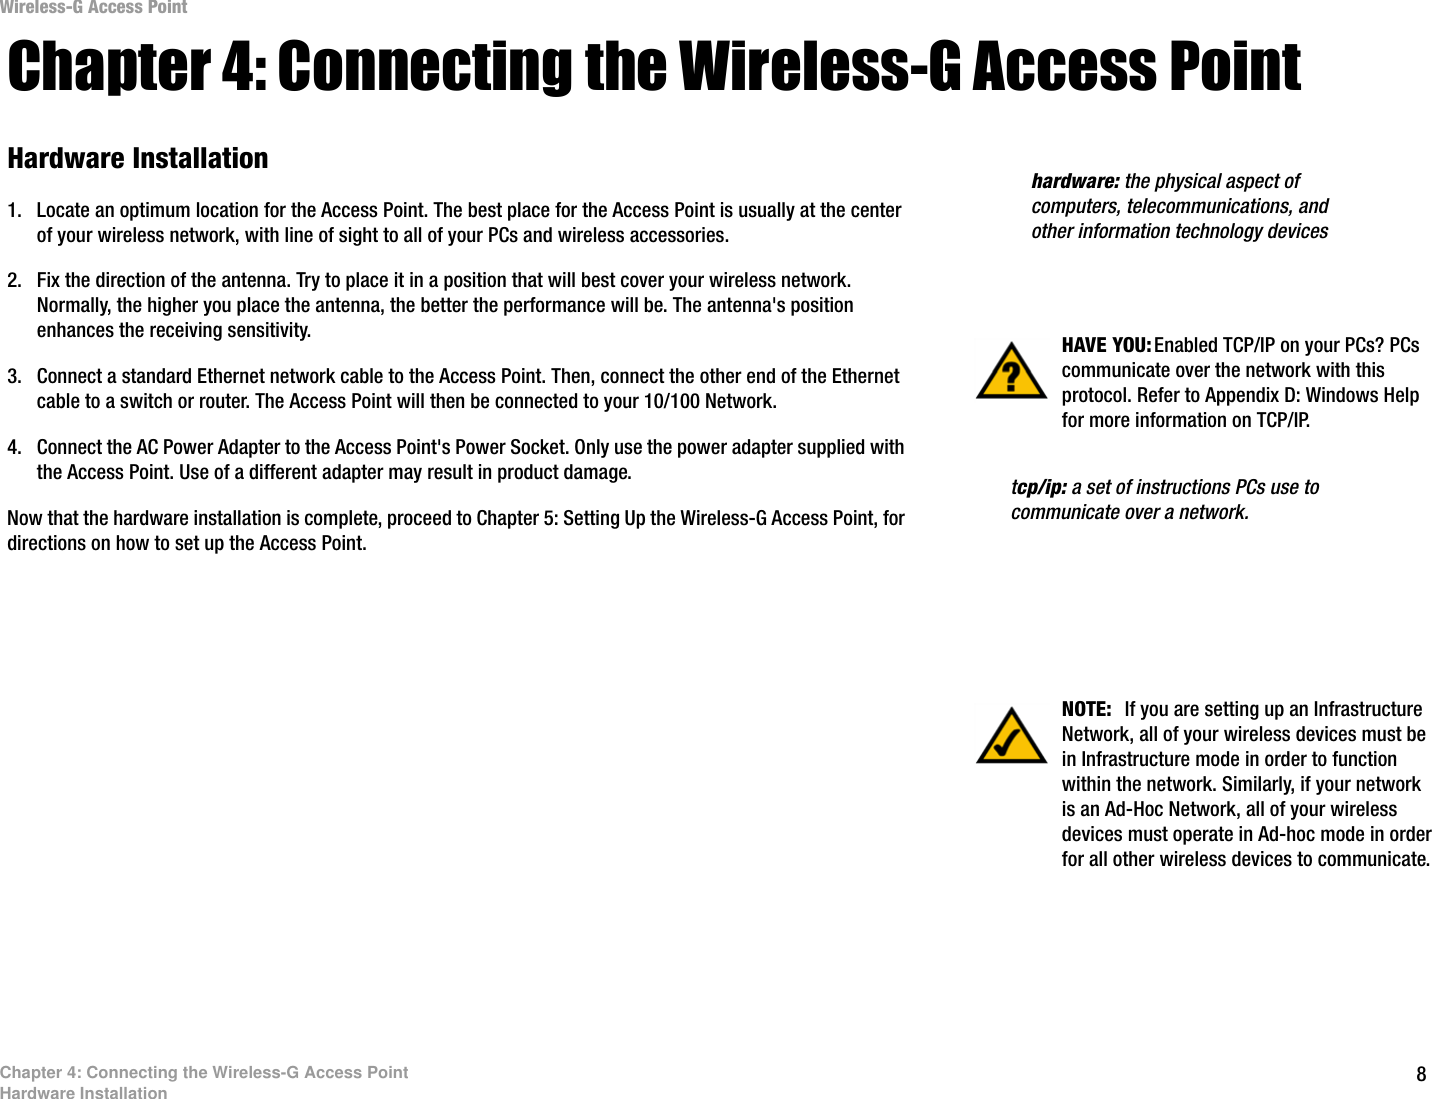 Wireless-G Access Point Chapter 4: Connecting the Wireless-G Access Point Hardware Installation  hardware: the physical aspect of 1.  Locate an optimum location for the Access Point. The best place for the Access Point is usually at the center  computers, telecommunications, and of your wireless network, with line of sight to all of your PCs and wireless accessories.  other information technology devices 2.  Fix the direction of the antenna. Try to place it in a position that will best cover your wireless network. Normally, the higher you place the antenna, the better the performance will be. The antenna&apos;s position enhances the receiving sensitivity.  HAVE YOU: Enabled TCP/IP on your PCs? PCs communicate over the network with this 3.  Connect a standard Ethernet network cable to the Access Point. Then, connect the other end of the Ethernet  protocol. Refer to Appendix D: Windows Helpcable to a switch or router. The Access Point will then be connected to your 10/100 Network.  for more information on TCP/IP. 4.  Connect the AC Power Adapter to the Access Point&apos;s Power Socket. Only use the power adapter supplied with the Access Point. Use of a different adapter may result in product damage.  tcp/ip: a set of instructions PCs use to Now that the hardware installation is complete, proceed to Chapter 5: Setting Up the Wireless-G Access Point, for  communicate over a network. directions on how to set up the Access Point. NOTE:  If you are setting up an Infrastructure Network, all of your wireless devices must be in Infrastructure mode in order to function within the network. Similarly, if your network is an Ad-Hoc Network, all of your wireless devices must operate in Ad-hoc mode in order for all other wireless devices to communicate. Chapter 4: Connecting the Wireless-G Access Point Hardware Installation  8 